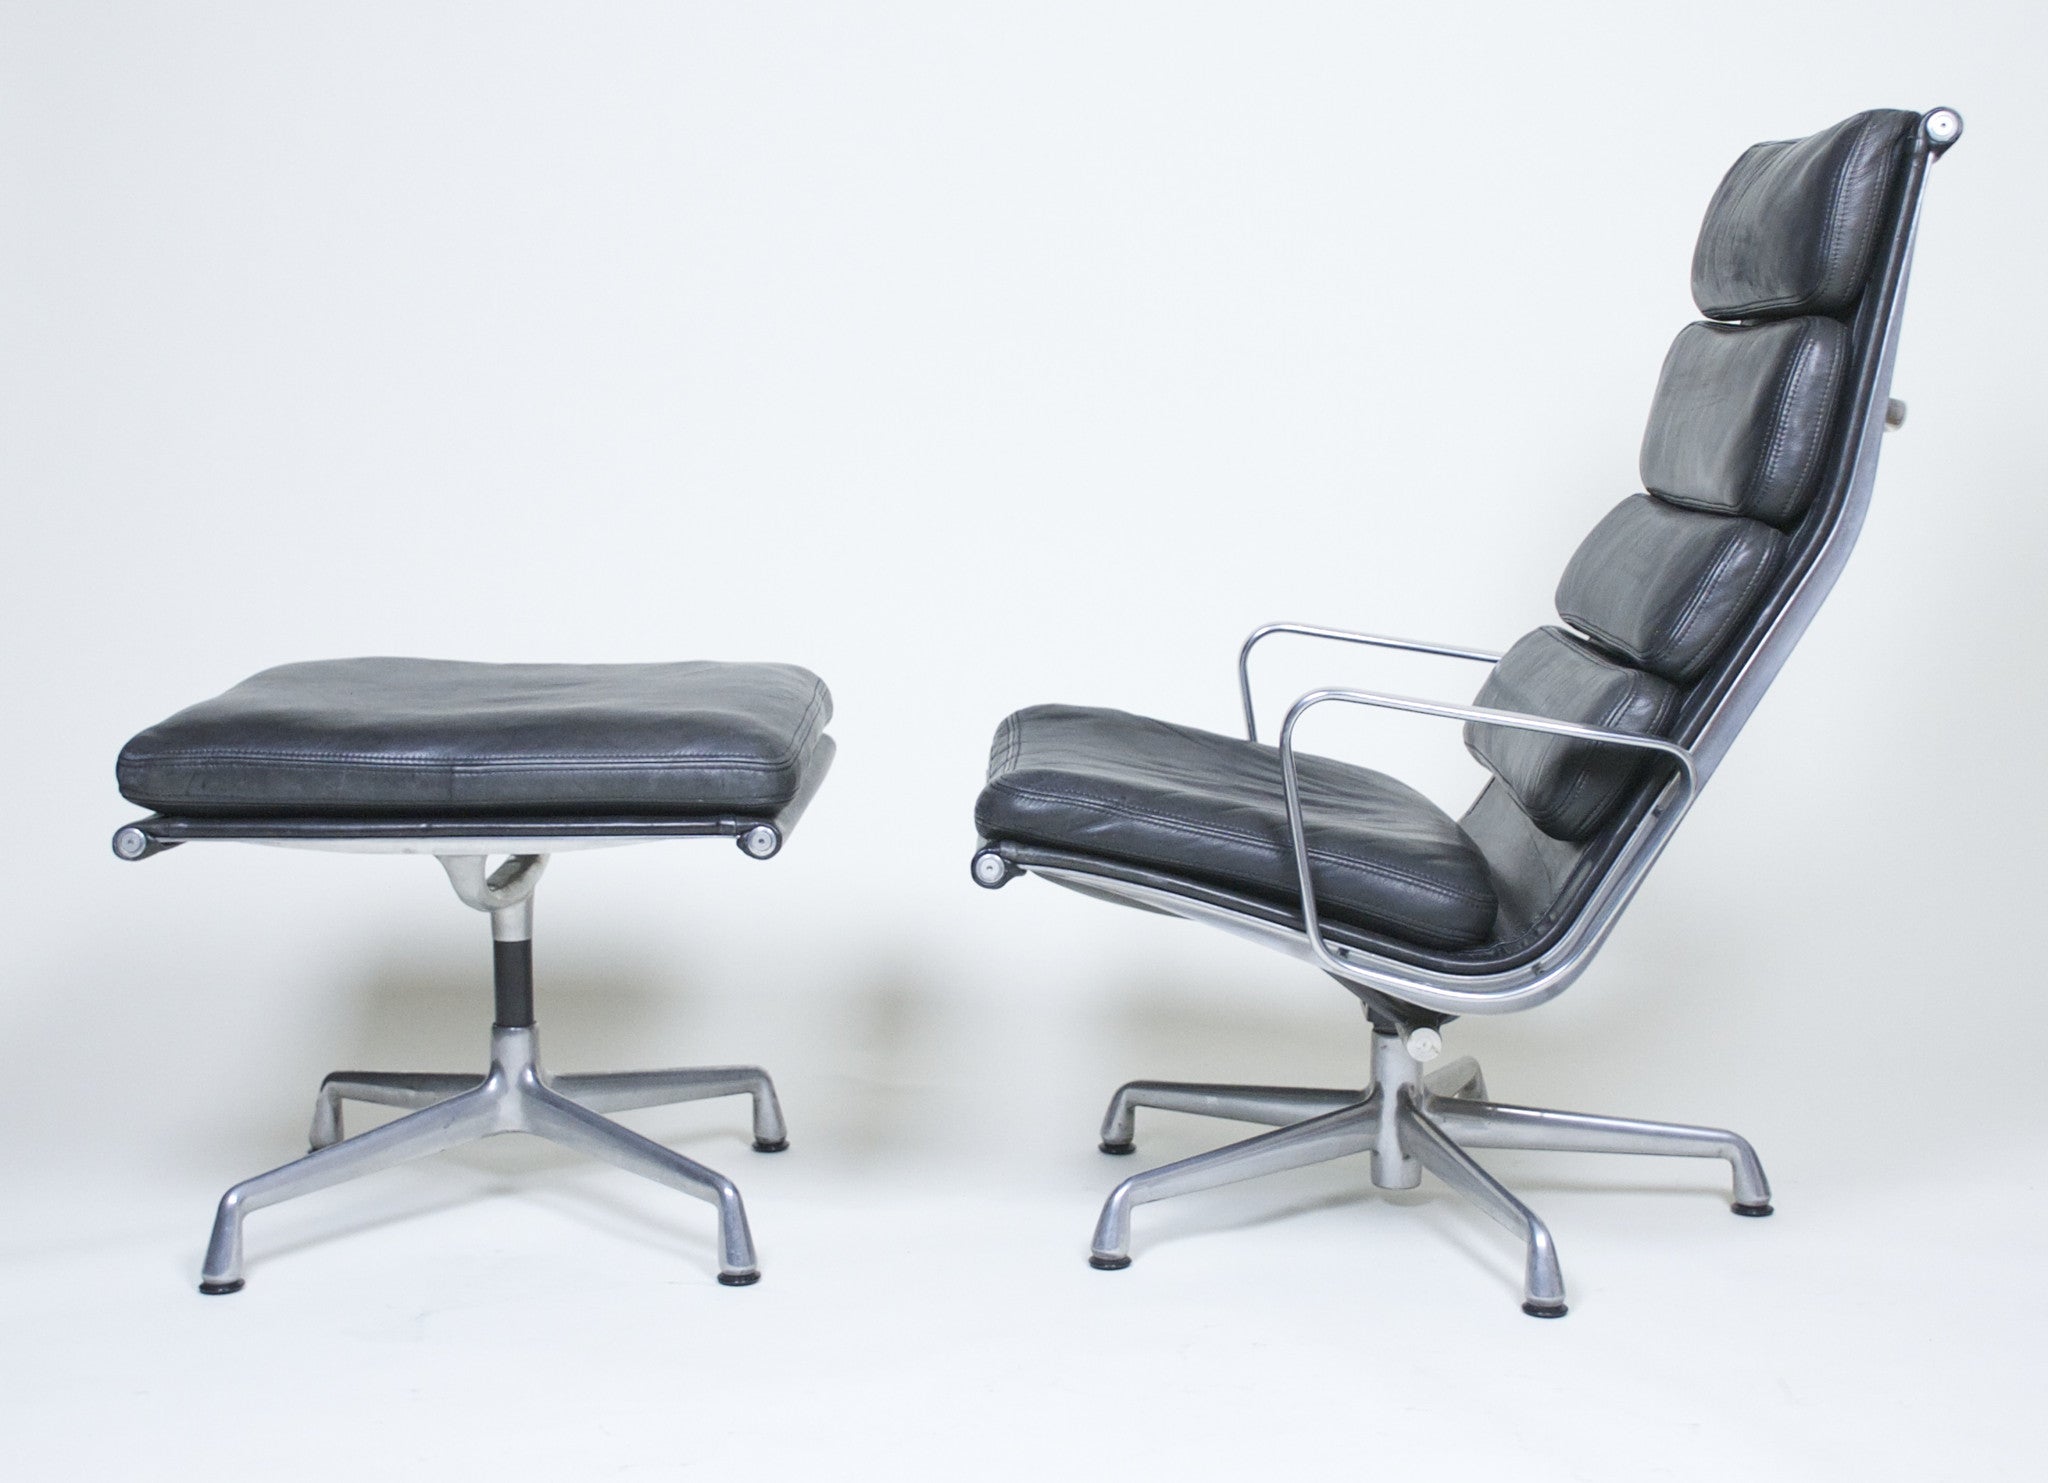 SOLD Eames Herman Miller Soft Pad Aluminum Lounge Chair with Ottoman Black Leather